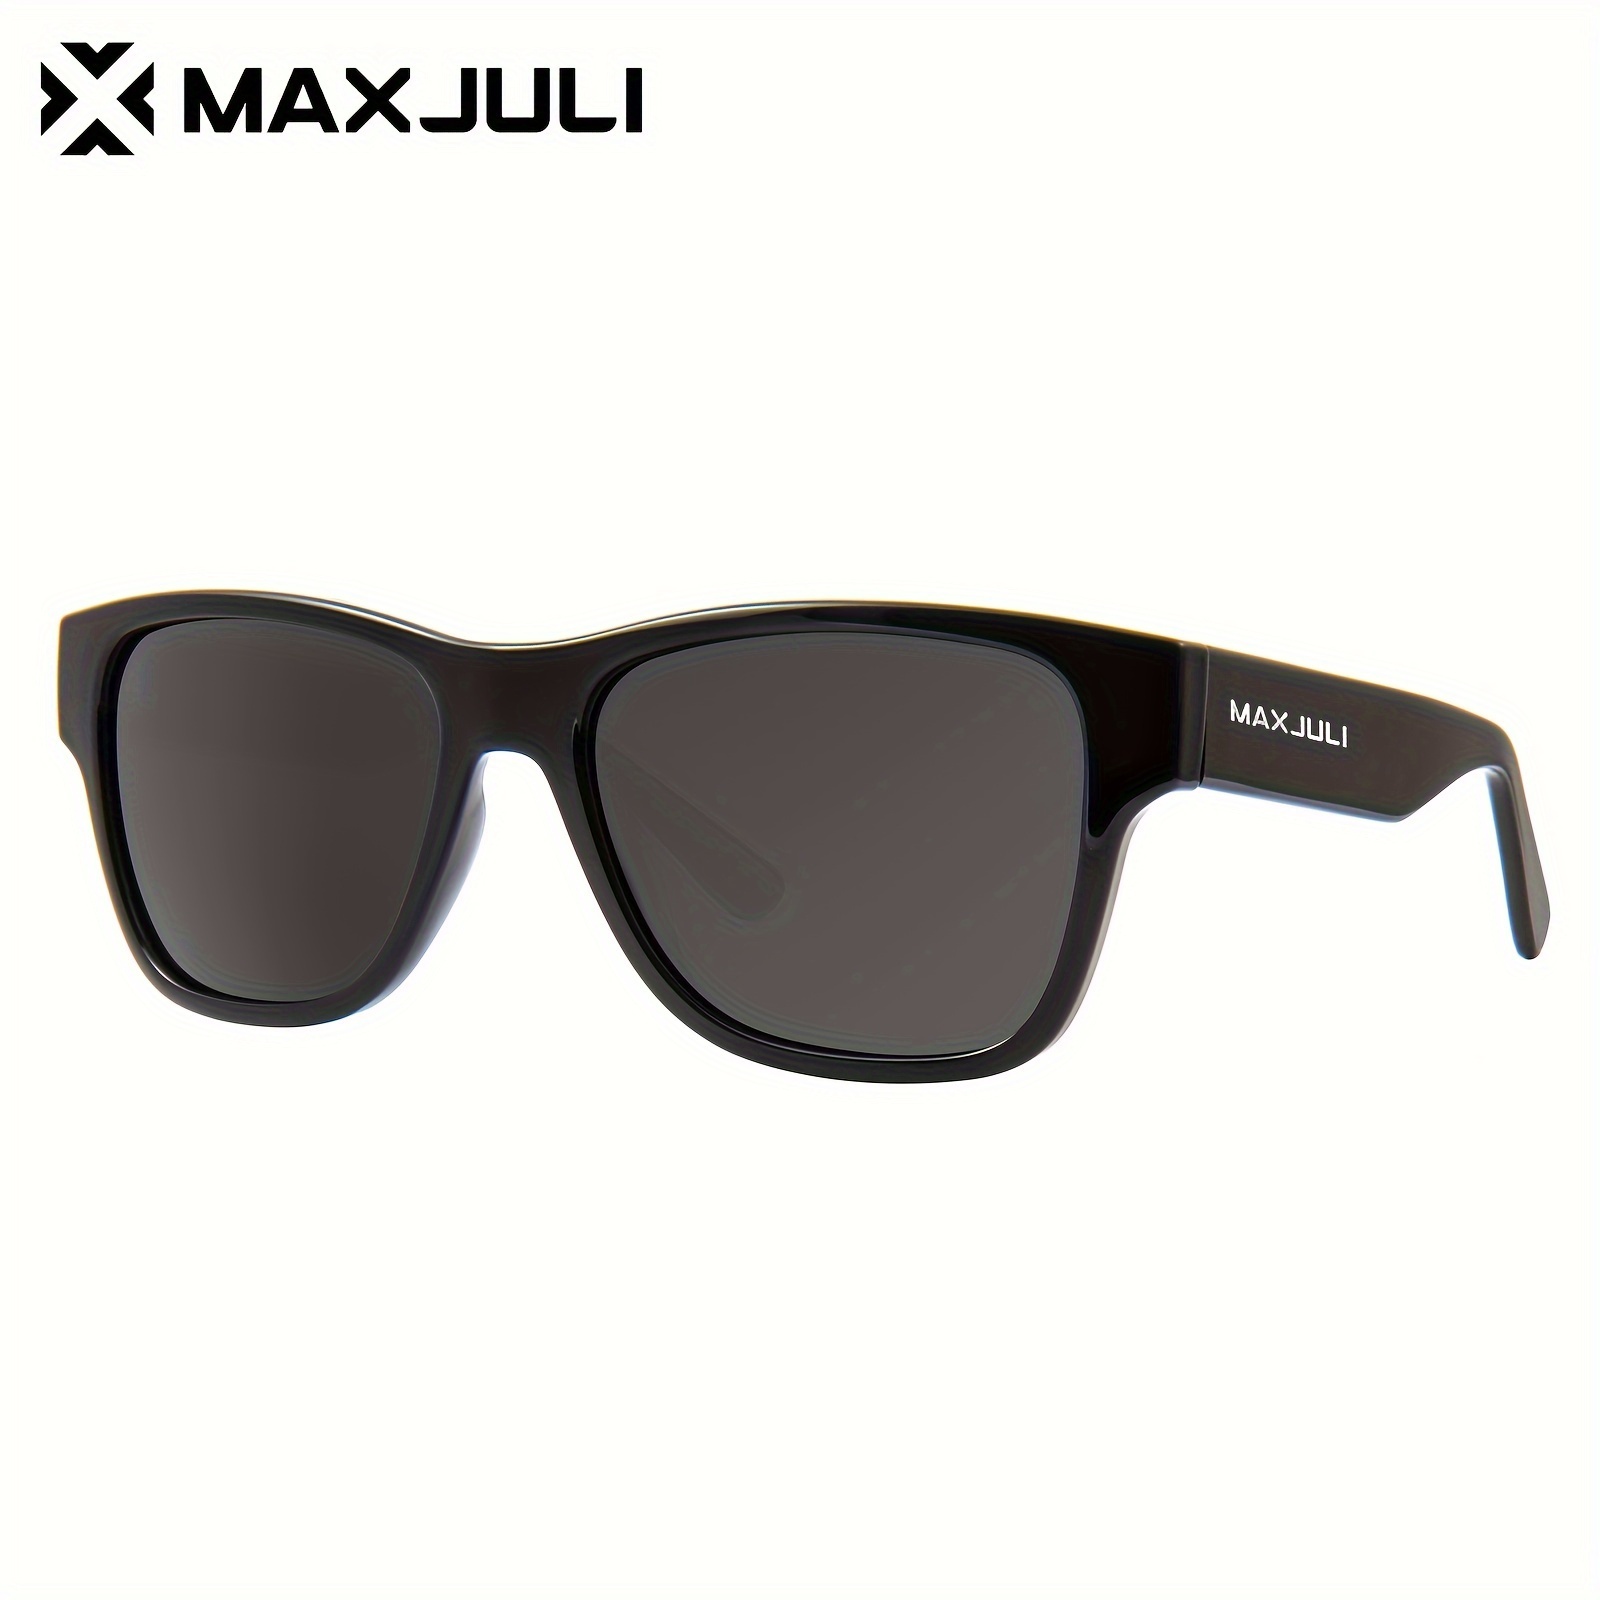 MAXJULI 1 Pack Stylish Eyewear for Men and Women, Polarized Sunglasses, Large Sunglasses for Big Heads Pit Vipers,Sun Glasses,Goggles Sunglasses